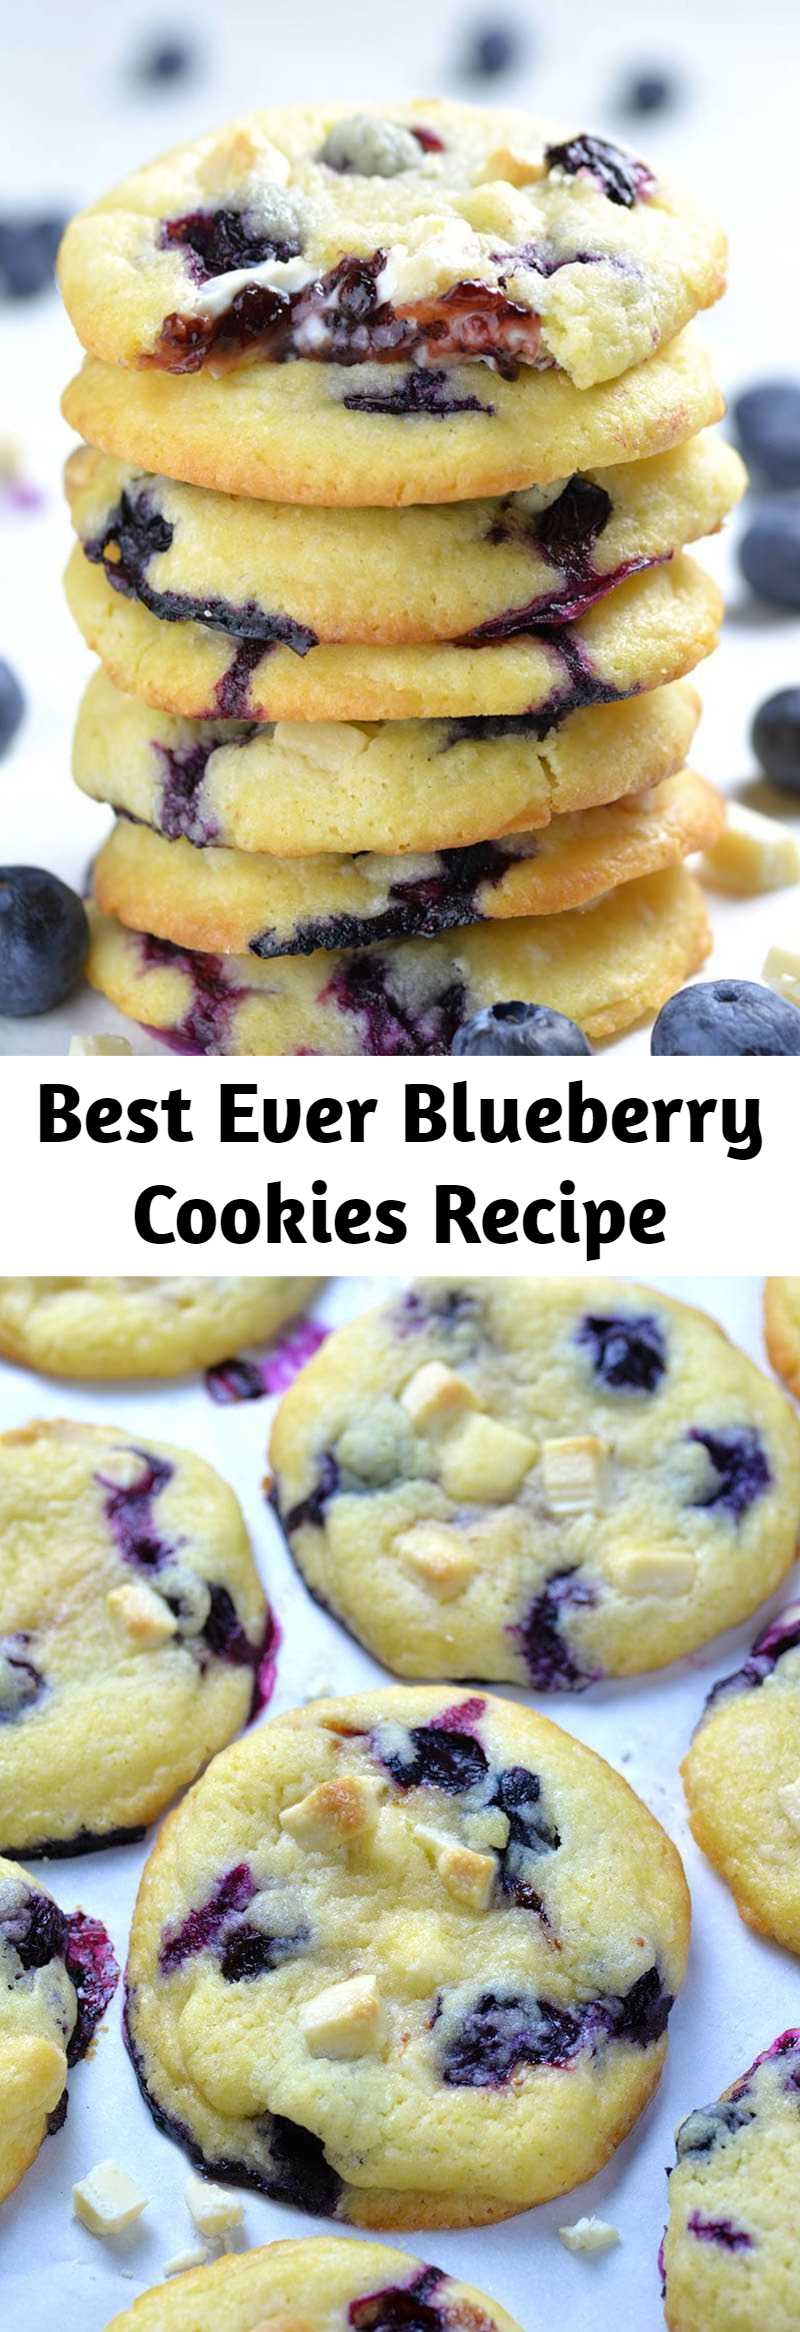 Best Ever Blueberry Cookies Recipe - Soft and chewy Blueberry Cookies with fresh blueberries, white chocolate chunks and gooey cream cheese and blueberry jam filling in the center are really the best blueberry cookies ever. #blueberry #cookies #blueberryrecipe #cookierecipe